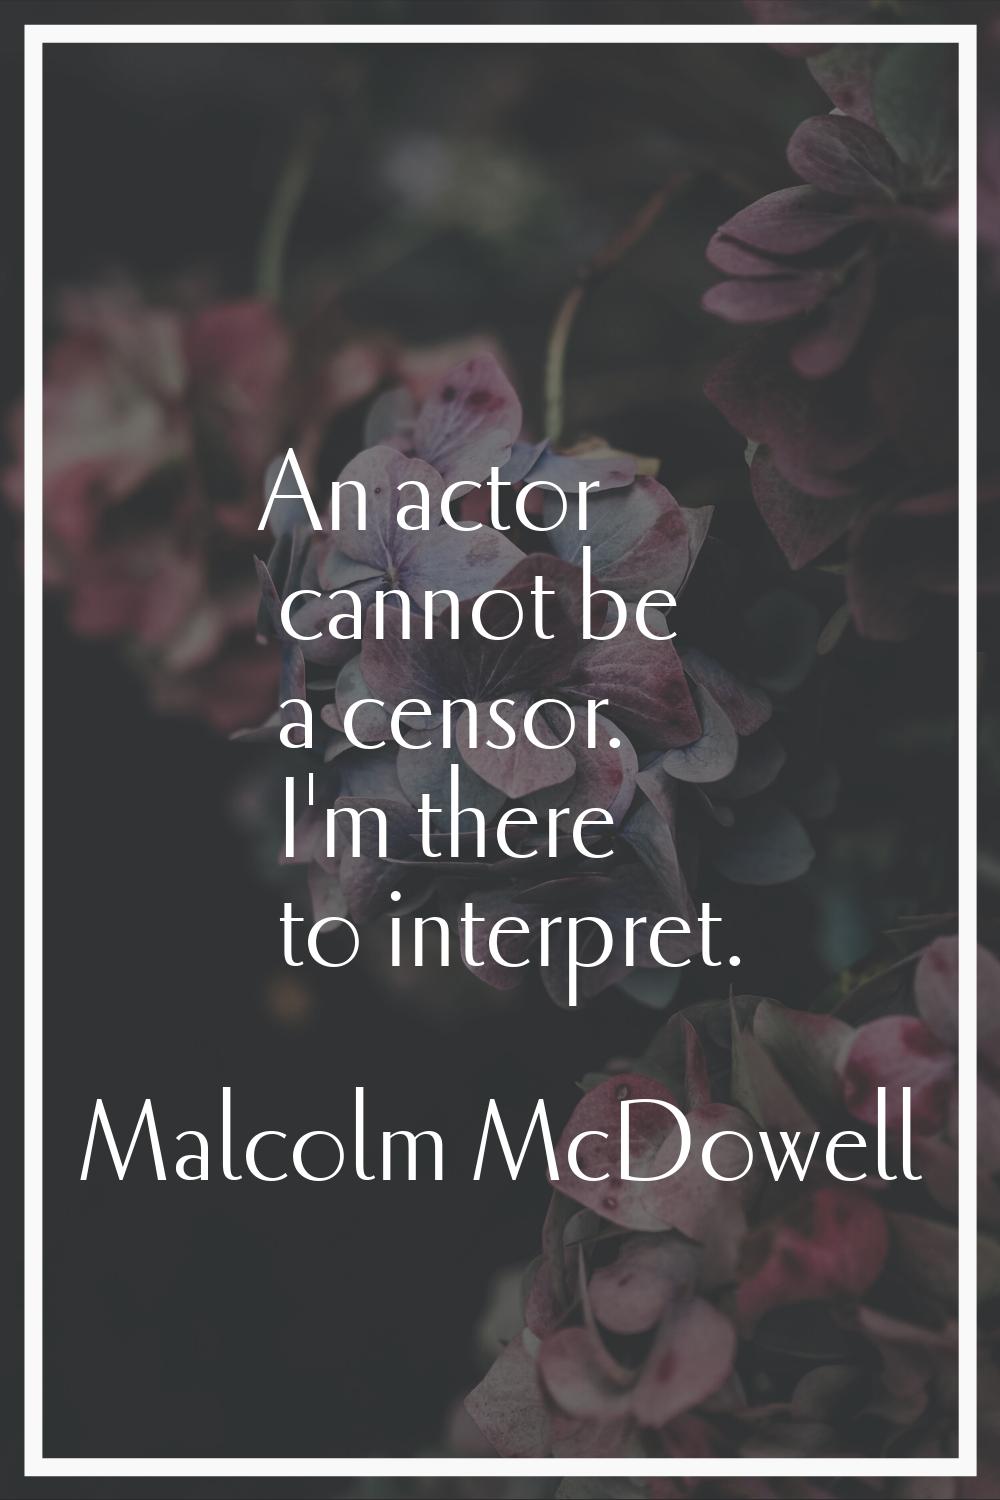 An actor cannot be a censor. I'm there to interpret.